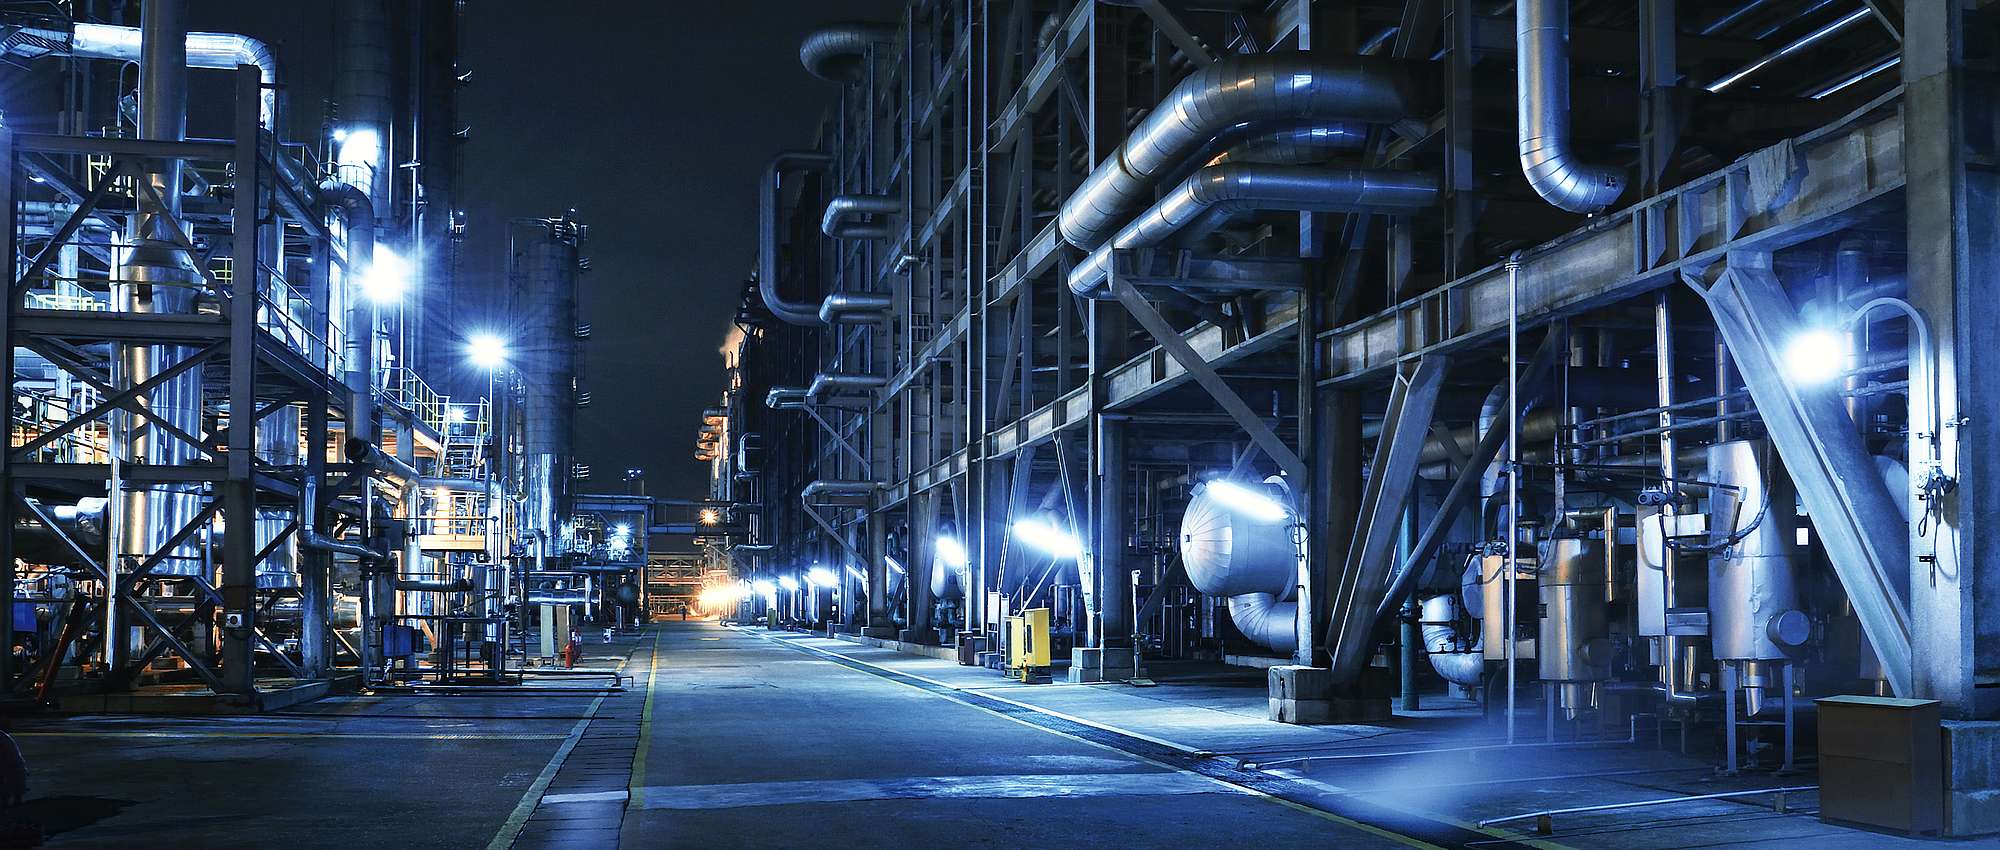 Chemical plant at night with several pipes in blue color scheme.